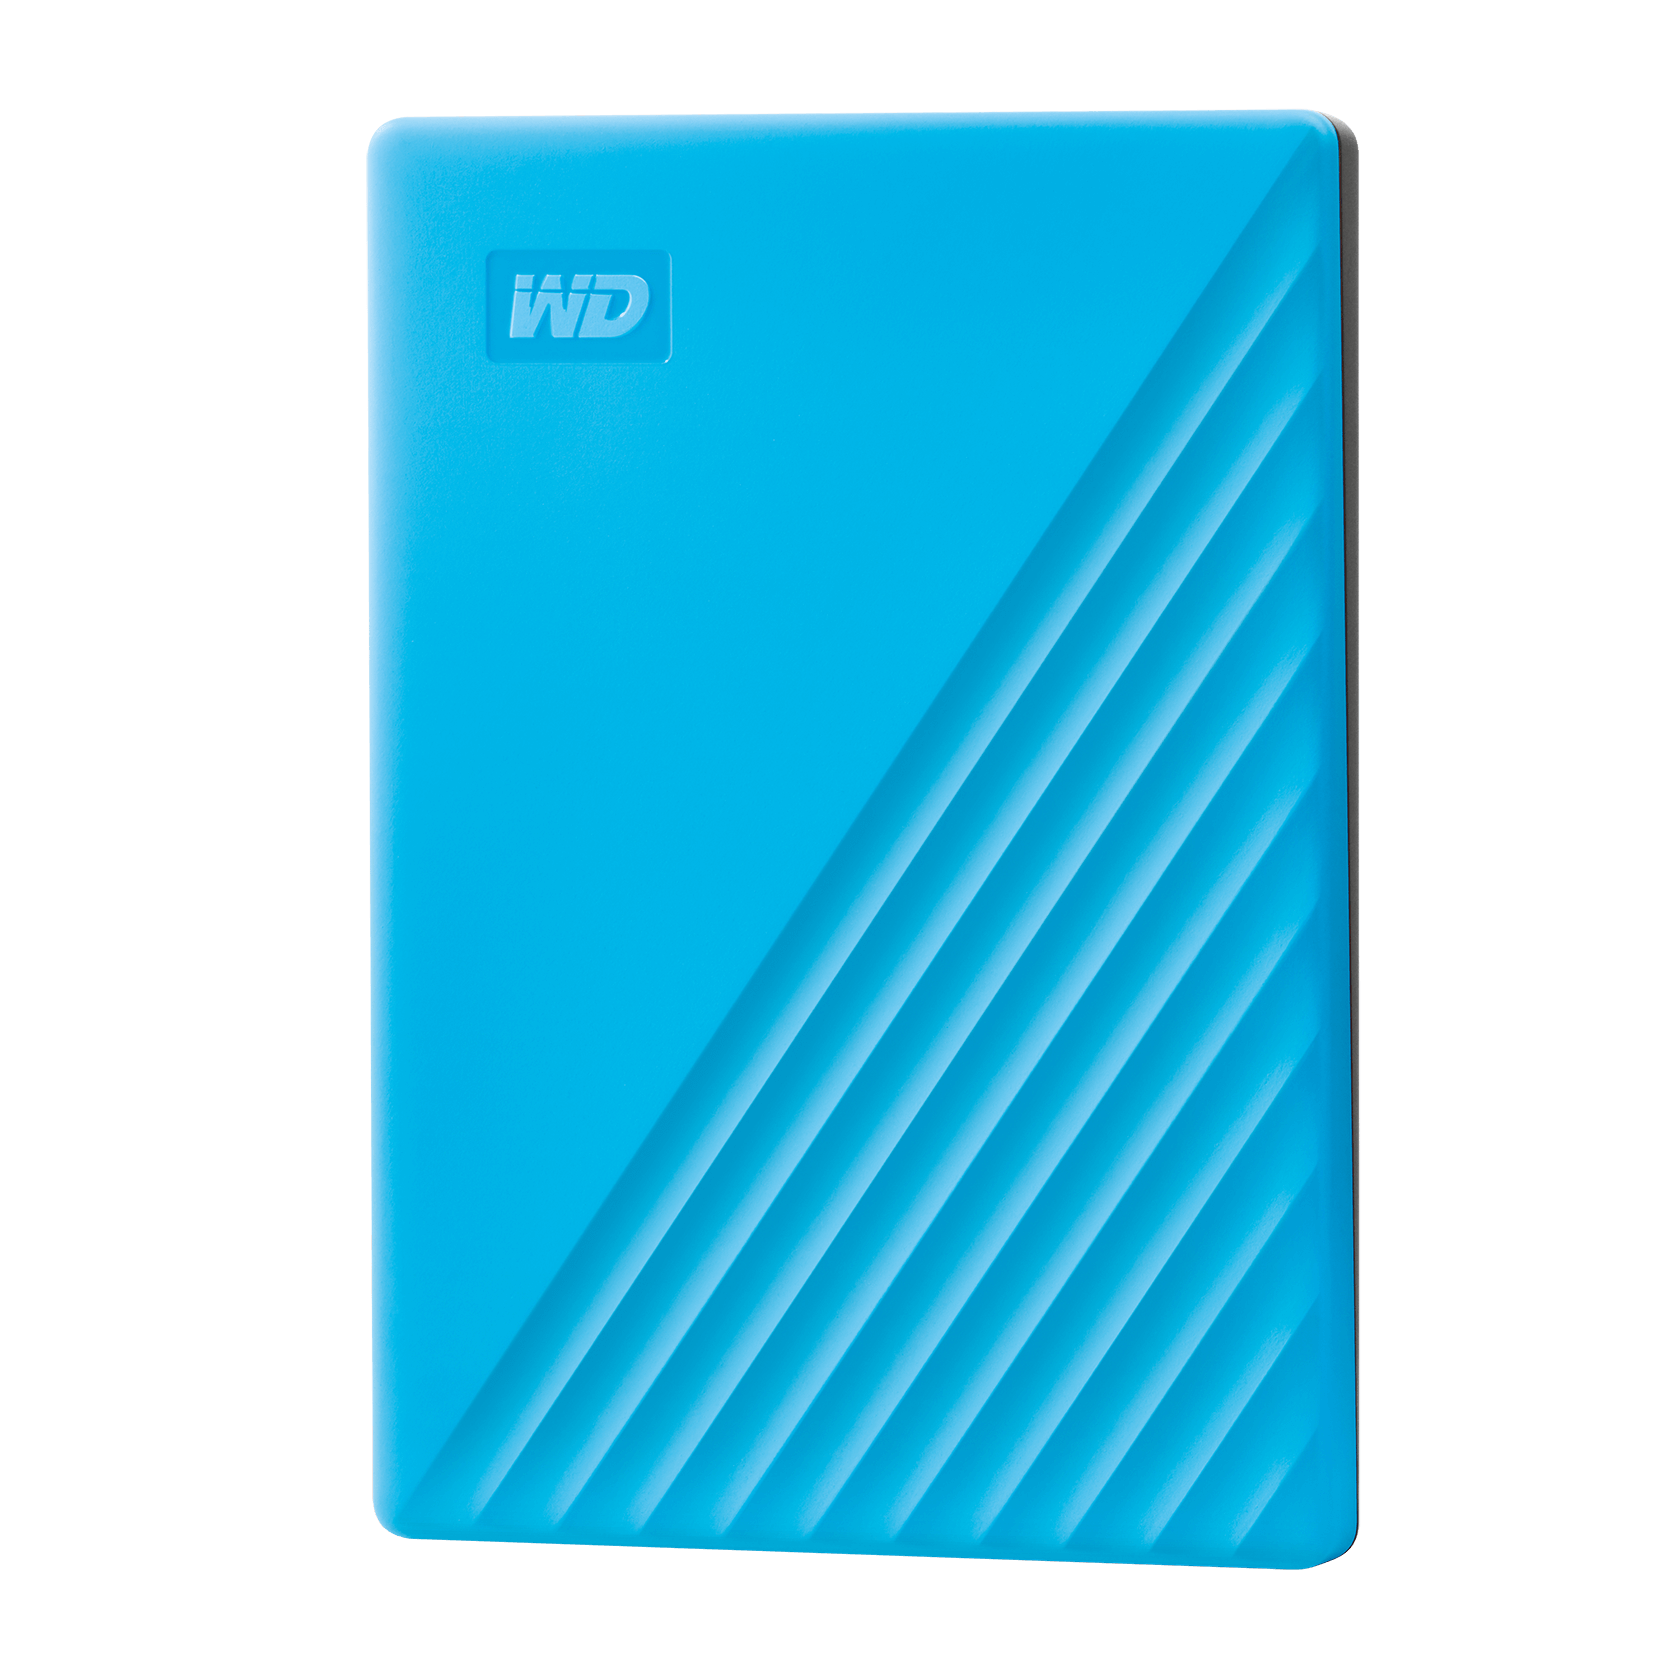 WD 2TB My Passport, Portable External Hard Drive, Blue - WDBYVG0020BBL-WESN - image 1 of 8